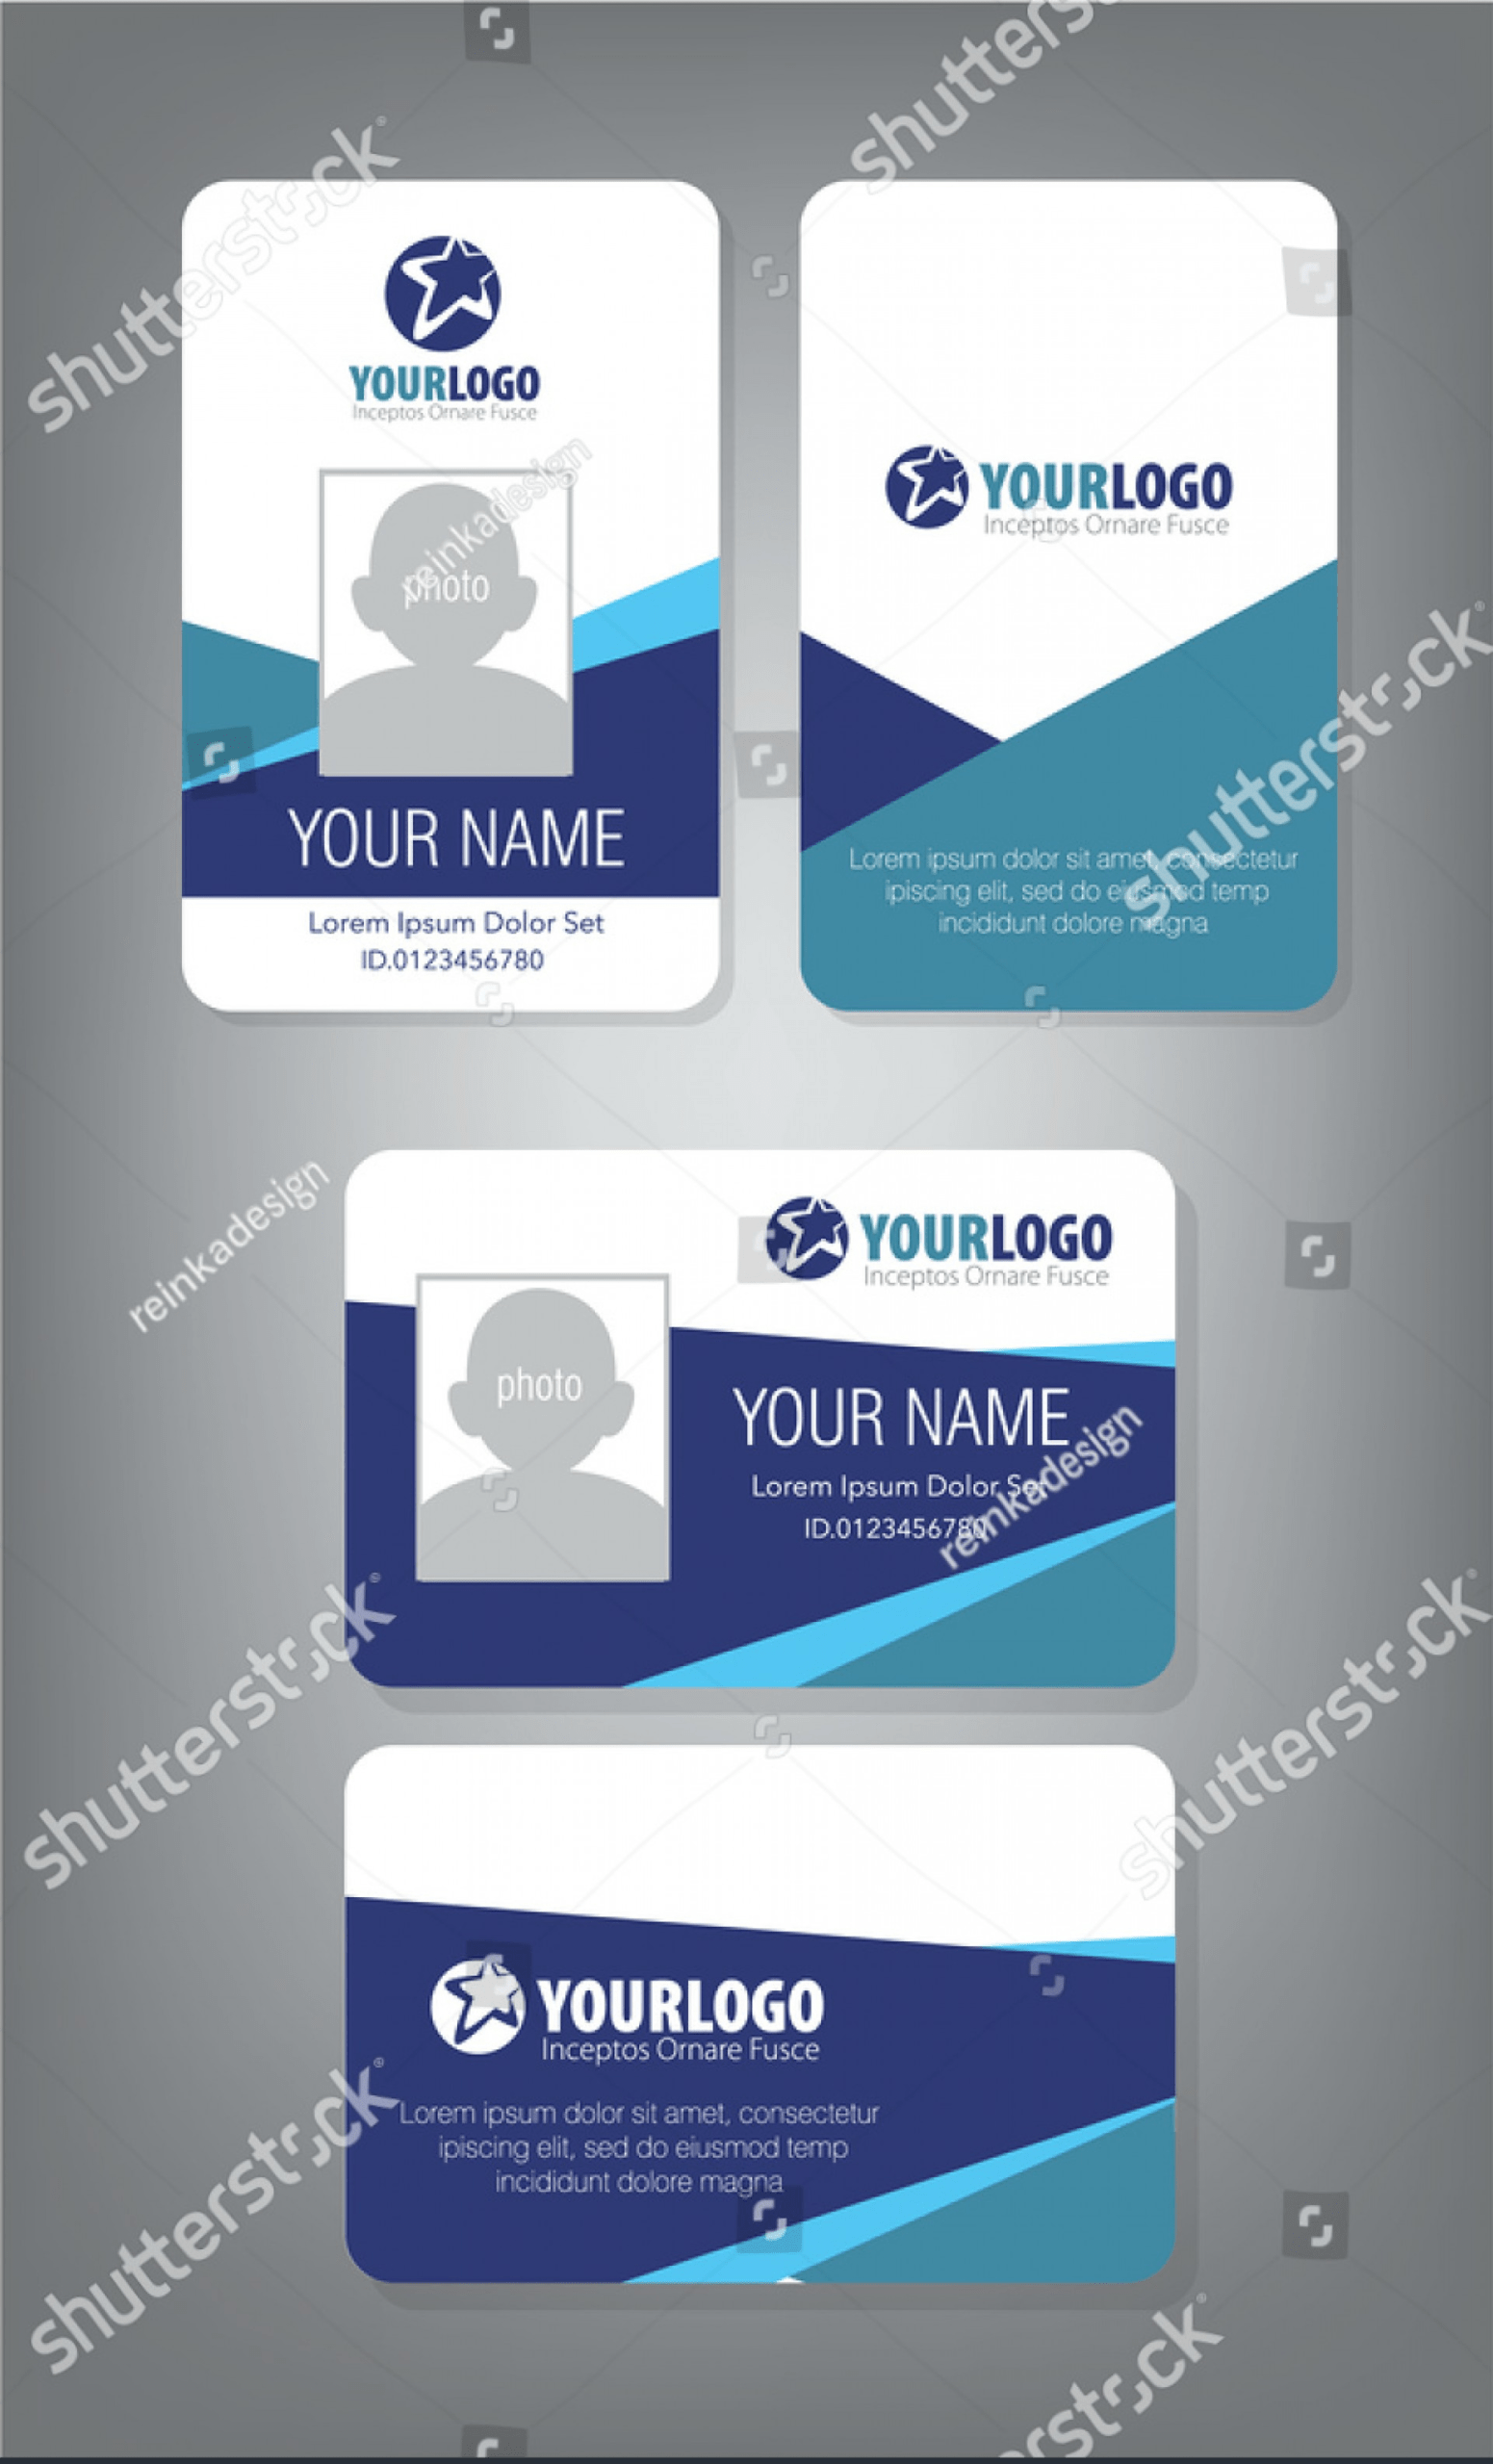 032 Template Ideas Netherlands Id Card Psd Photoshop Throughout Portrait Id Card Template